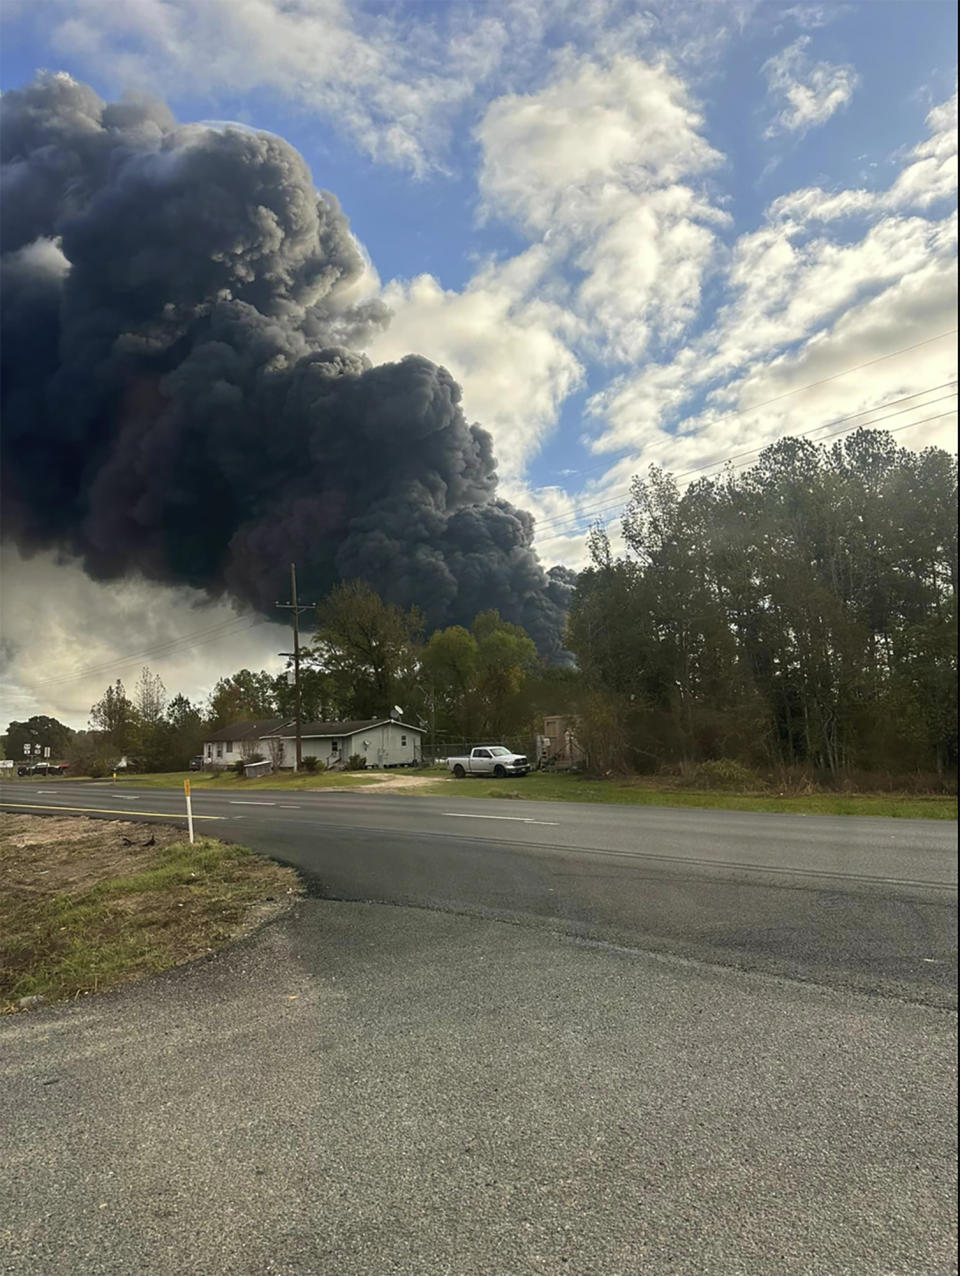 In this photo provided by Janay Jones, smoke fills the sky from a chemical plant fire in Shepherd, Texas on Thursday, Nov. 8, 2023. Authorities issued a shelter in place order for the Texas residents within a one-mile radius of the chemical plant fire Wednesday. (Janay Jones via AP)